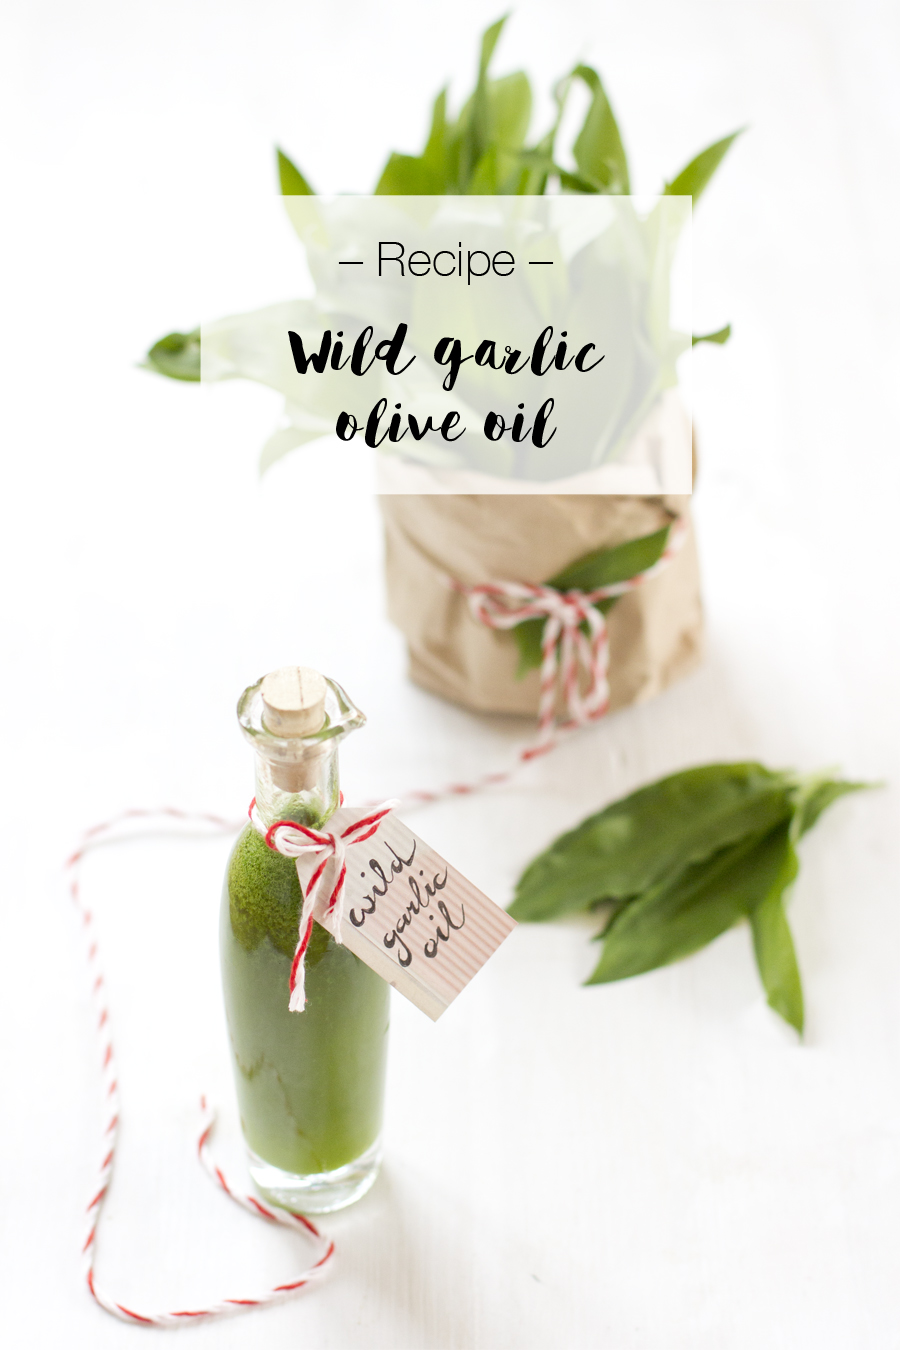 Wild garlic oil | LOOK WHAT I MADE ...